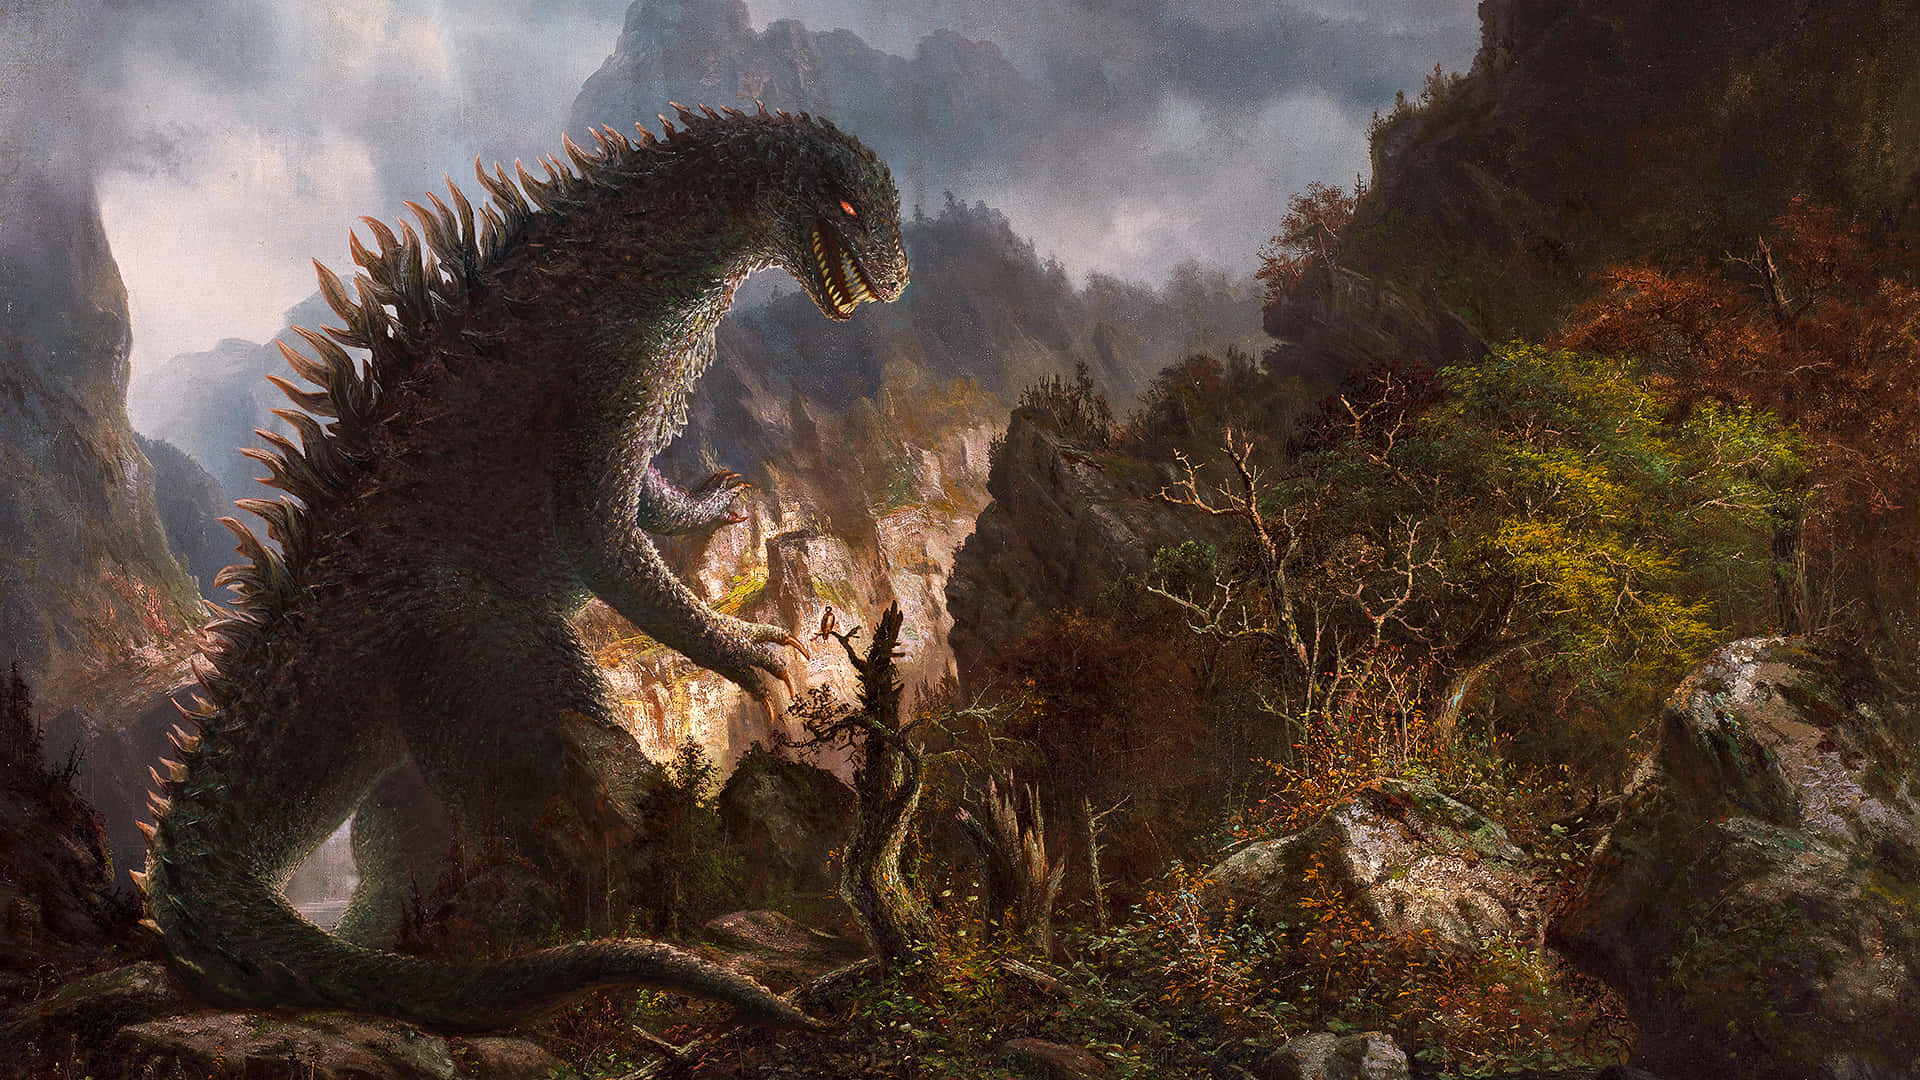 Godzilla In Mountain Forest Art Picture